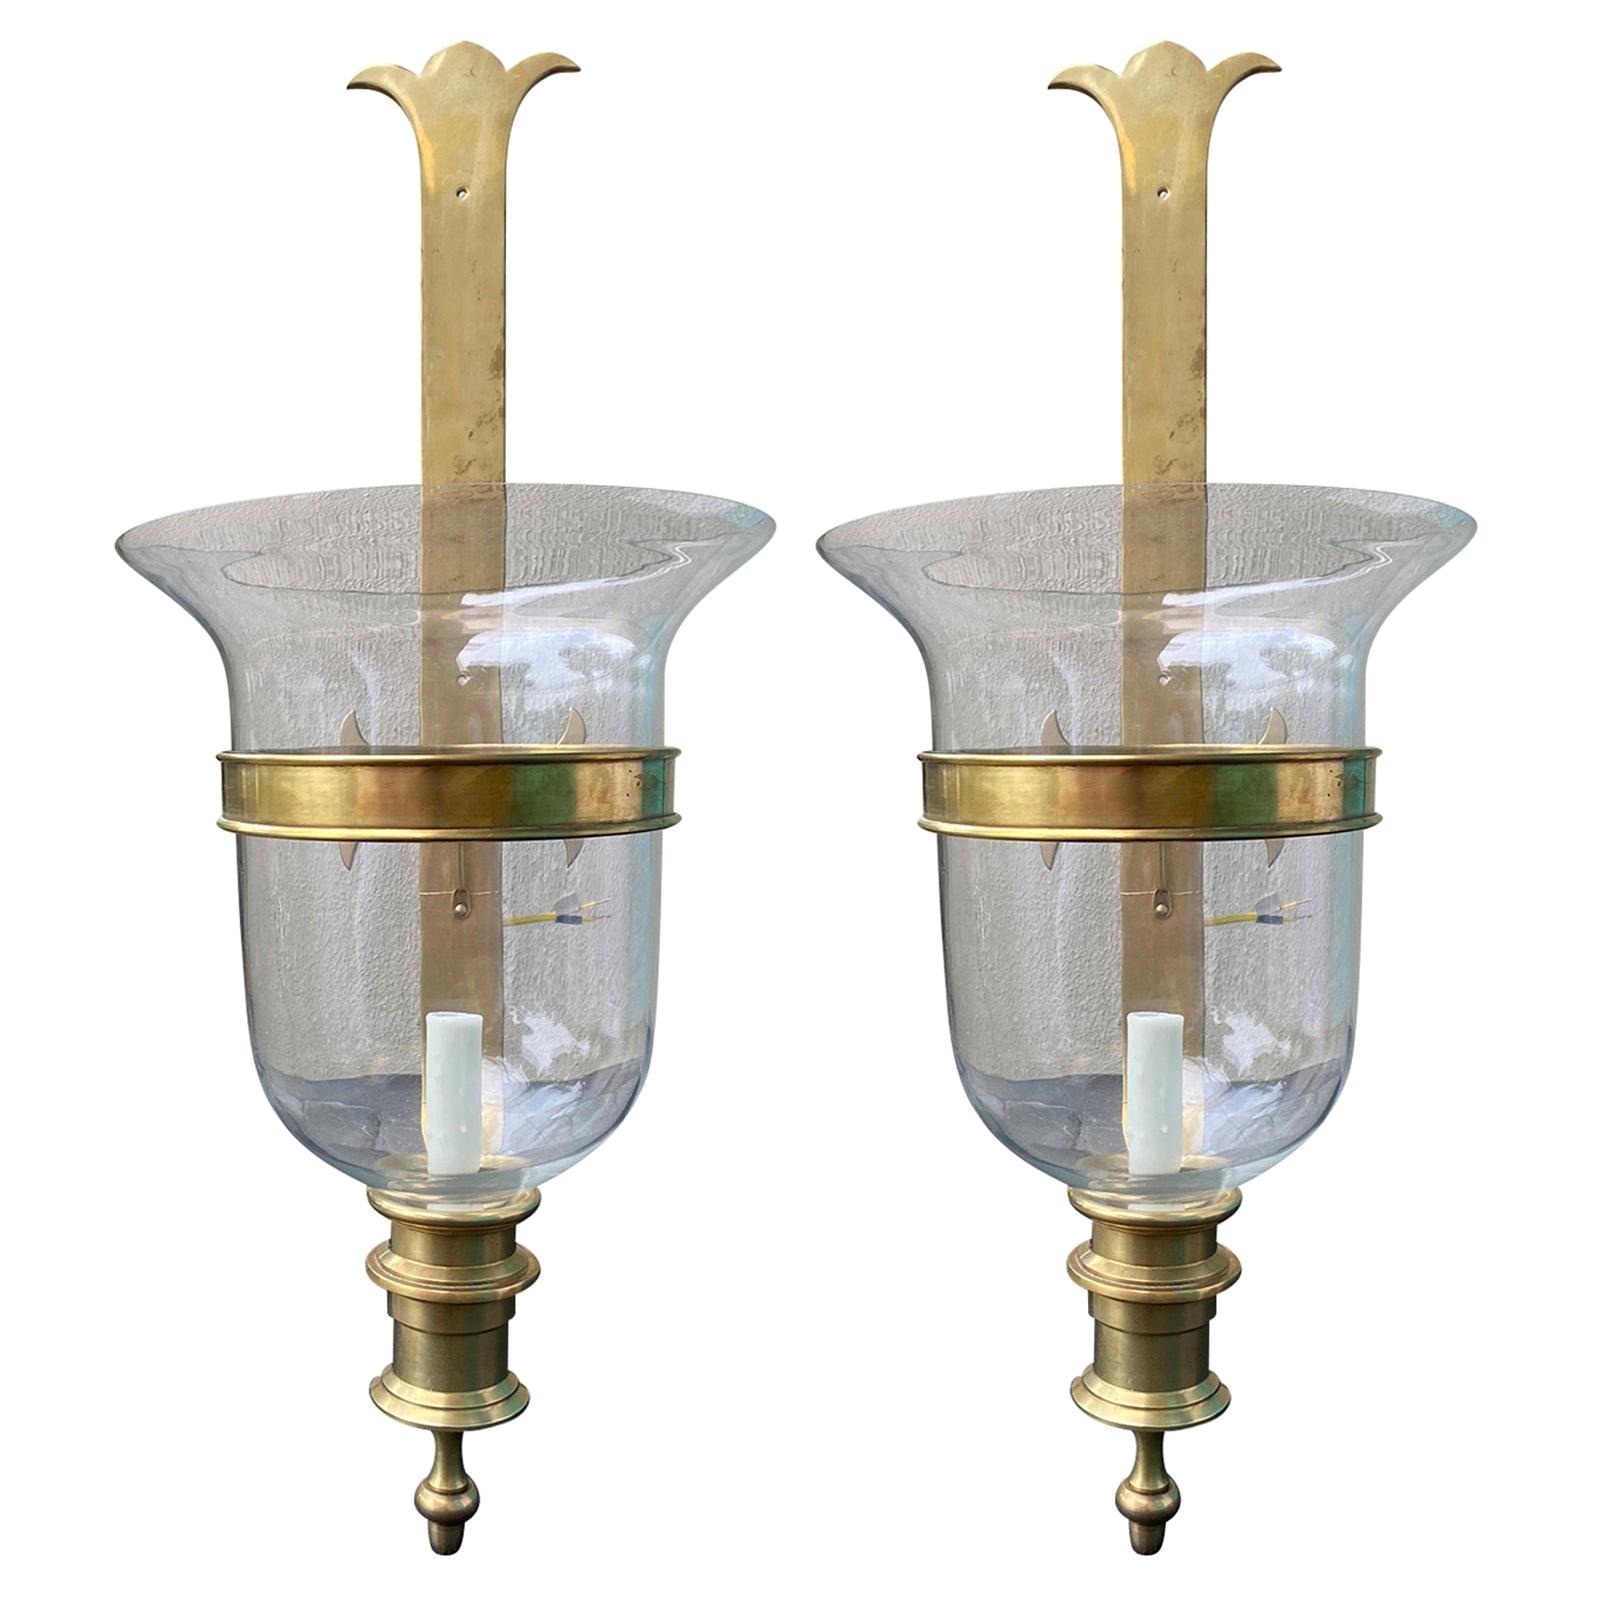 Pair of Circa 1970s-1980s Chapman Brass Sconces with Hurricane Globes, Labeled For Sale